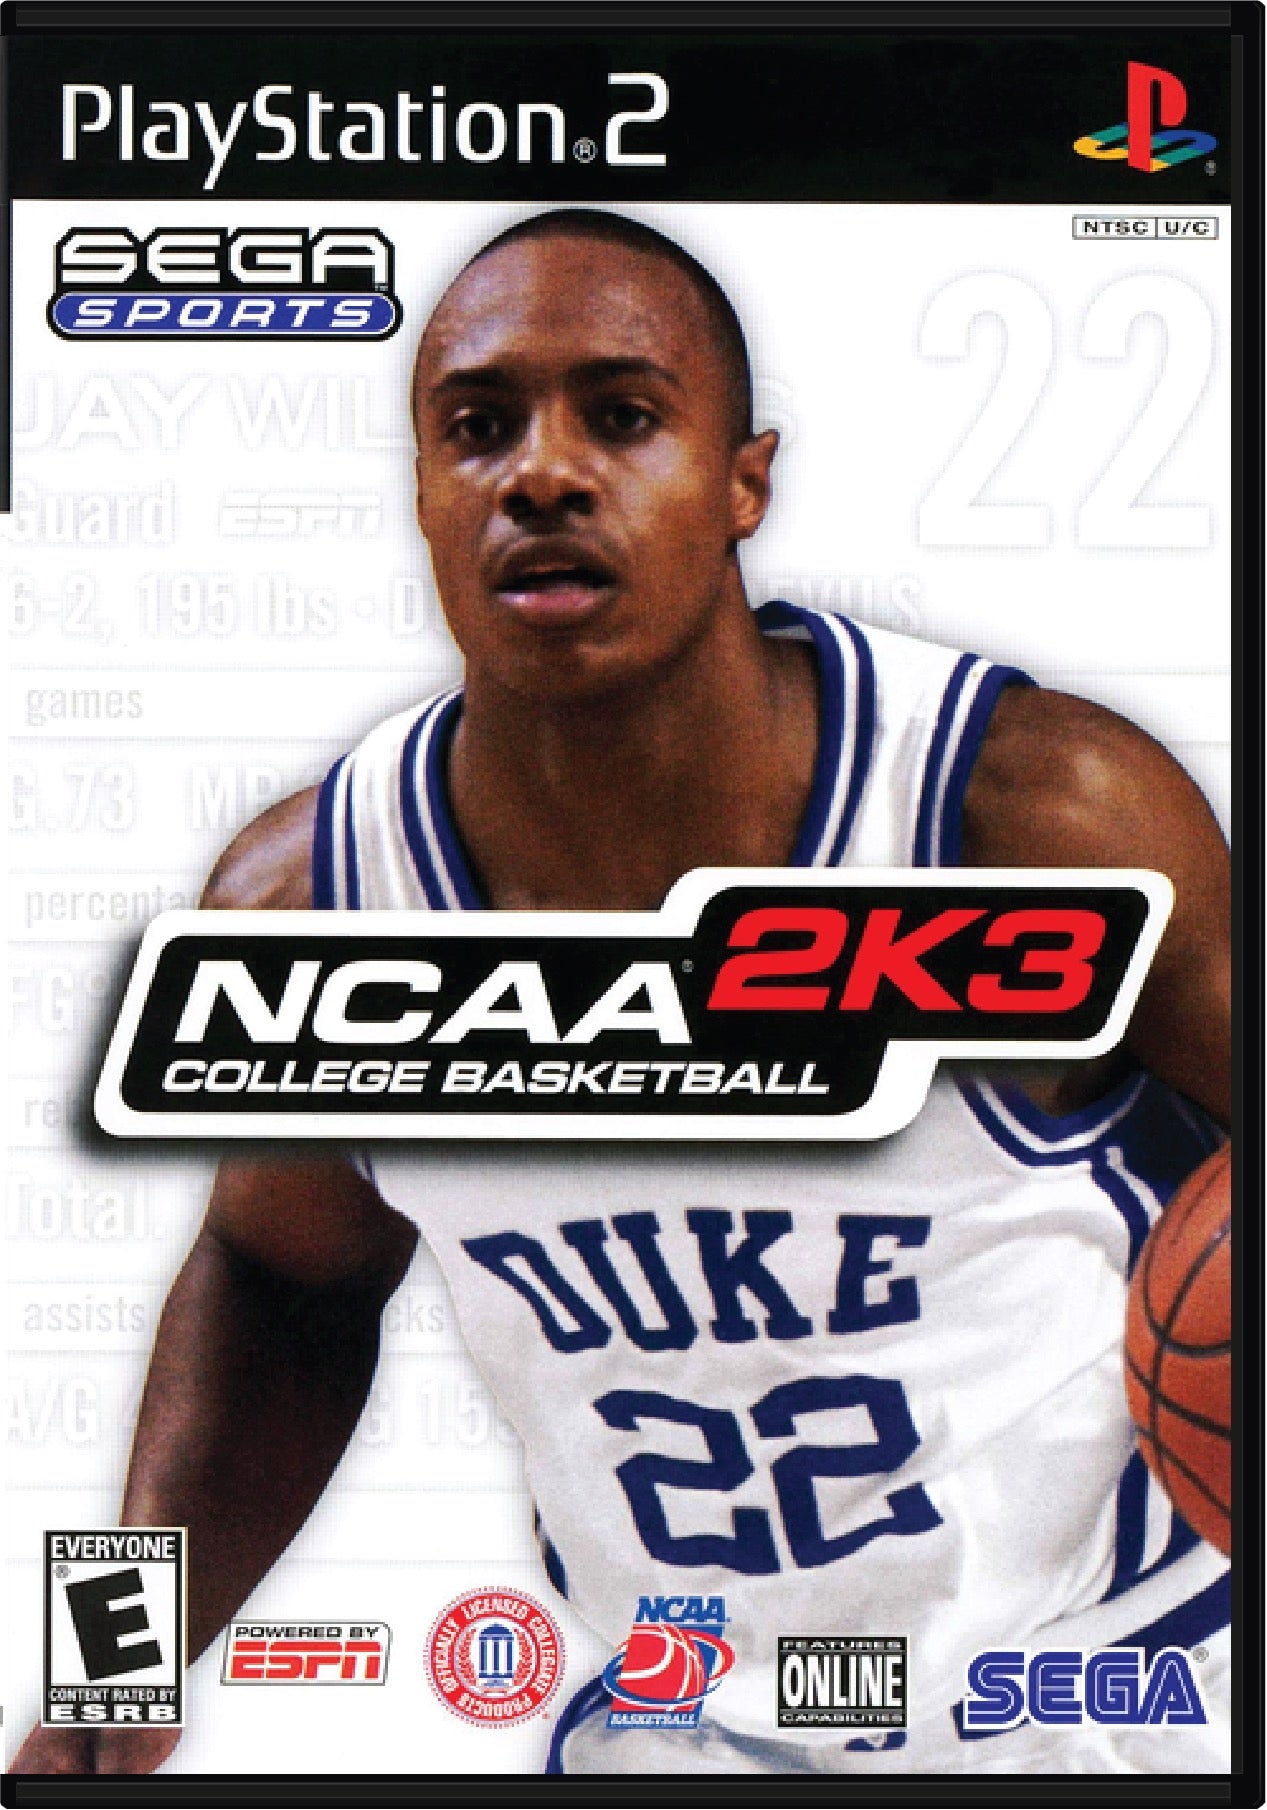 NCAA College Basketball 2K3 Cover Art and Product Photo